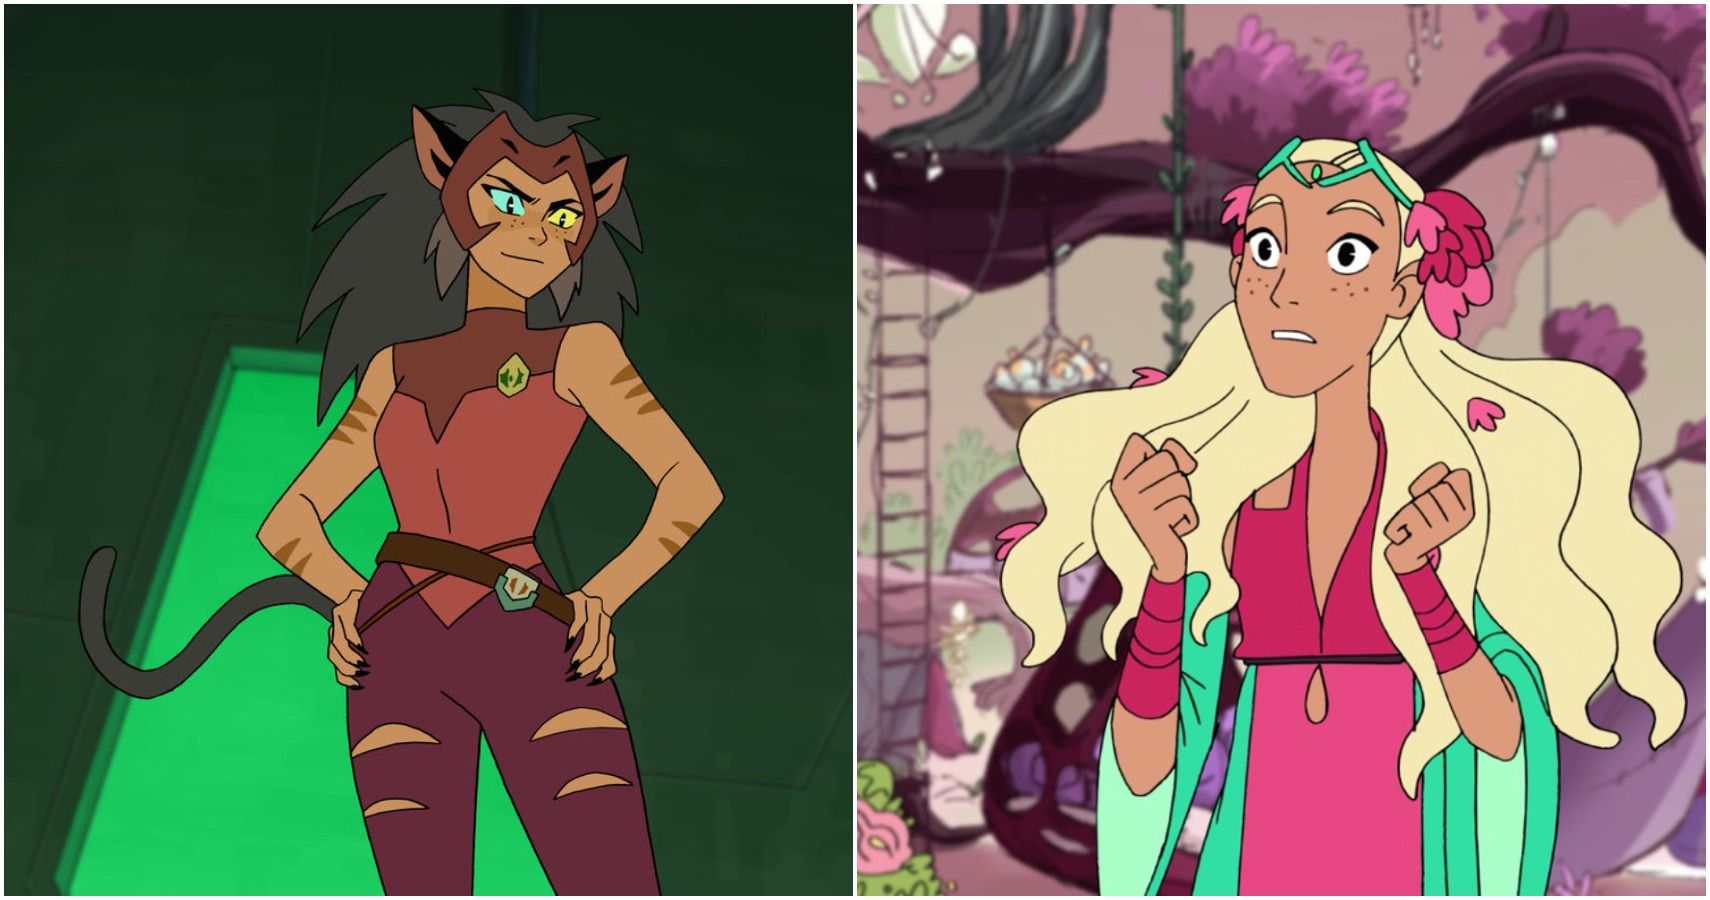 She Ra The Princesses Of Power Which Character Are You Based On Your Zodiac Sign